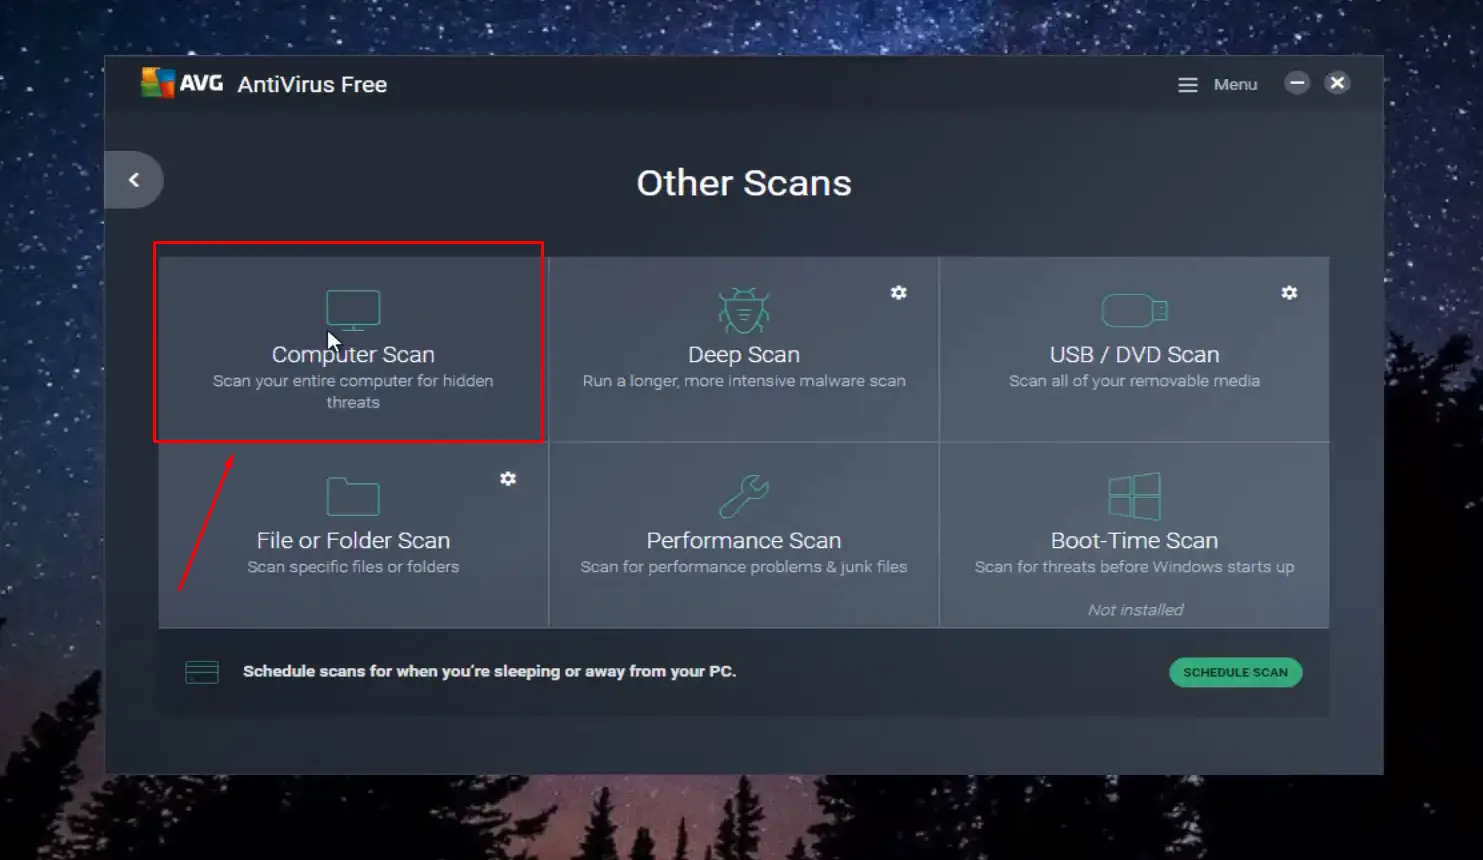 How can I run Smart Scan on my PC?